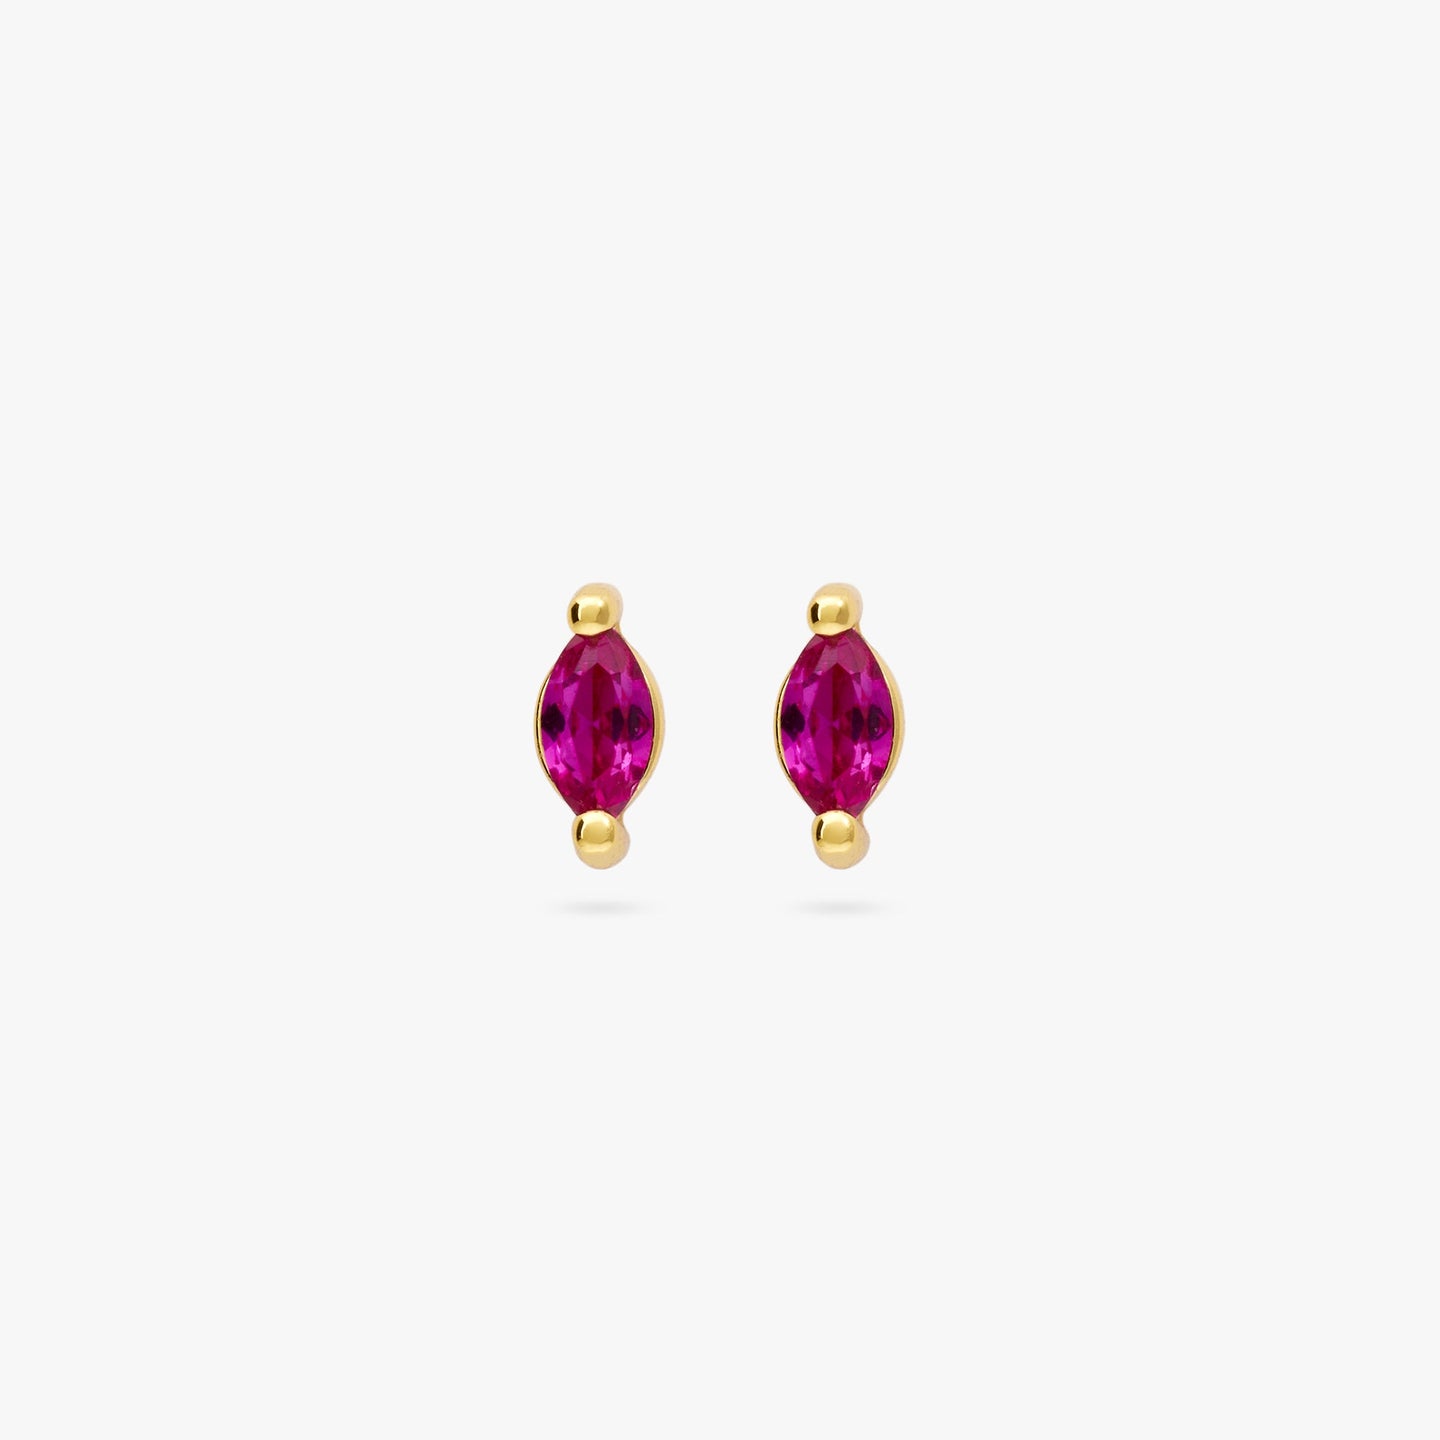 The marquise mini stud features a green oblong shaped gem and has gold accents [pair] color:null|gold/pink